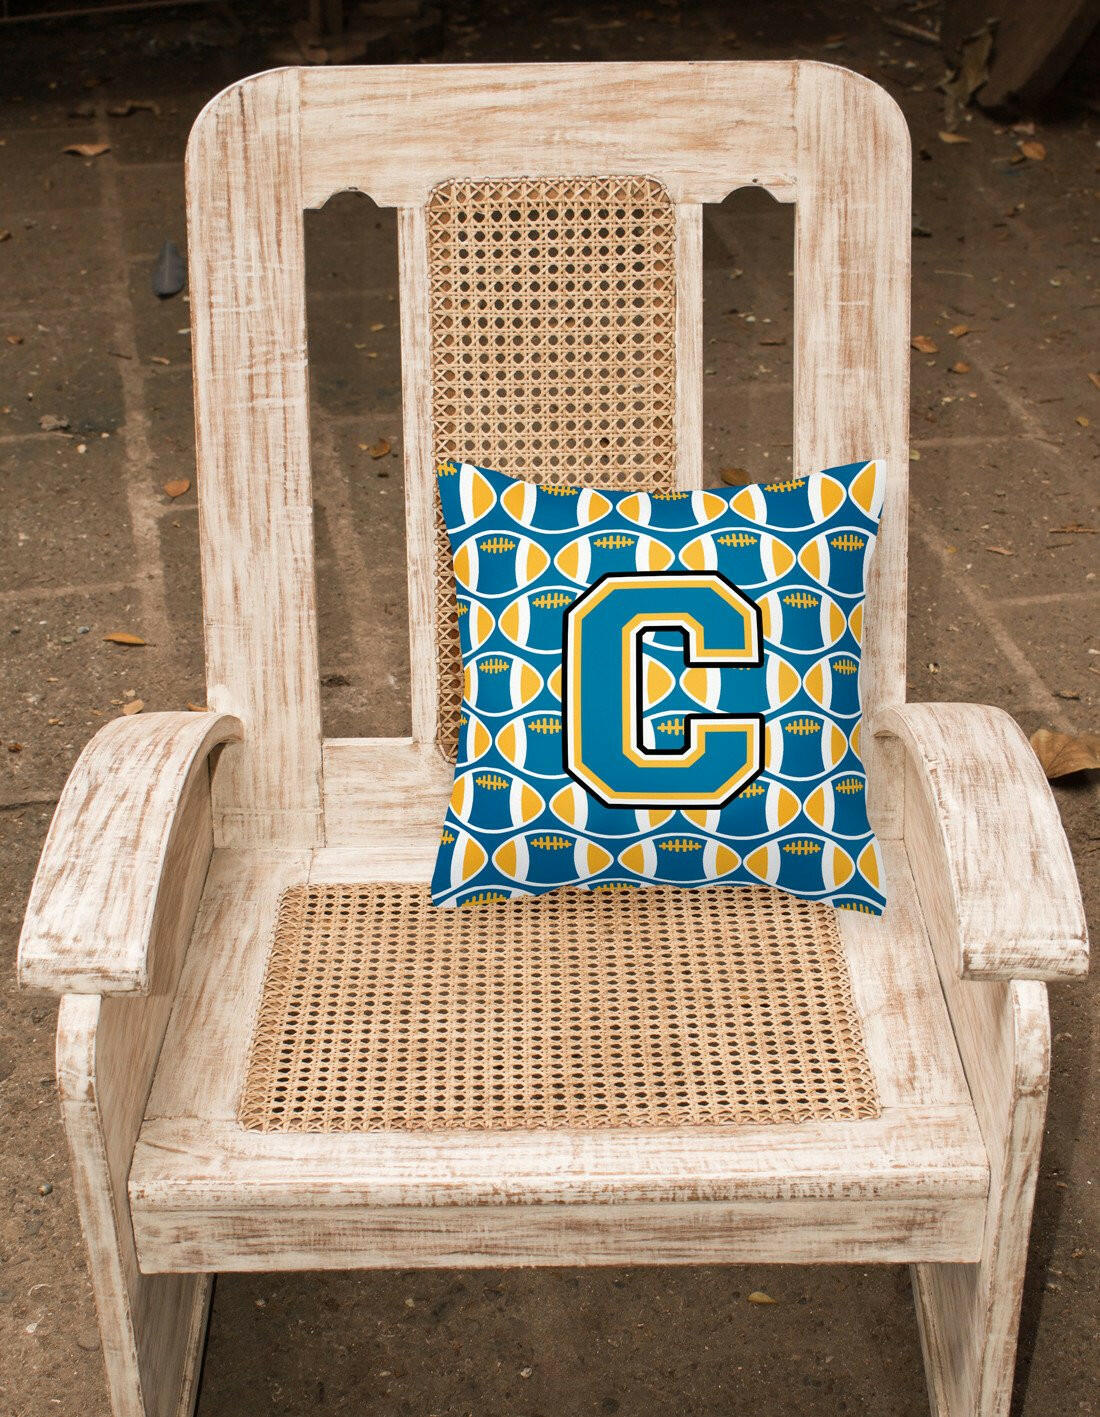 Letter C Football Blue and Gold Fabric Decorative Pillow CJ1077-CPW1414 by Caroline's Treasures